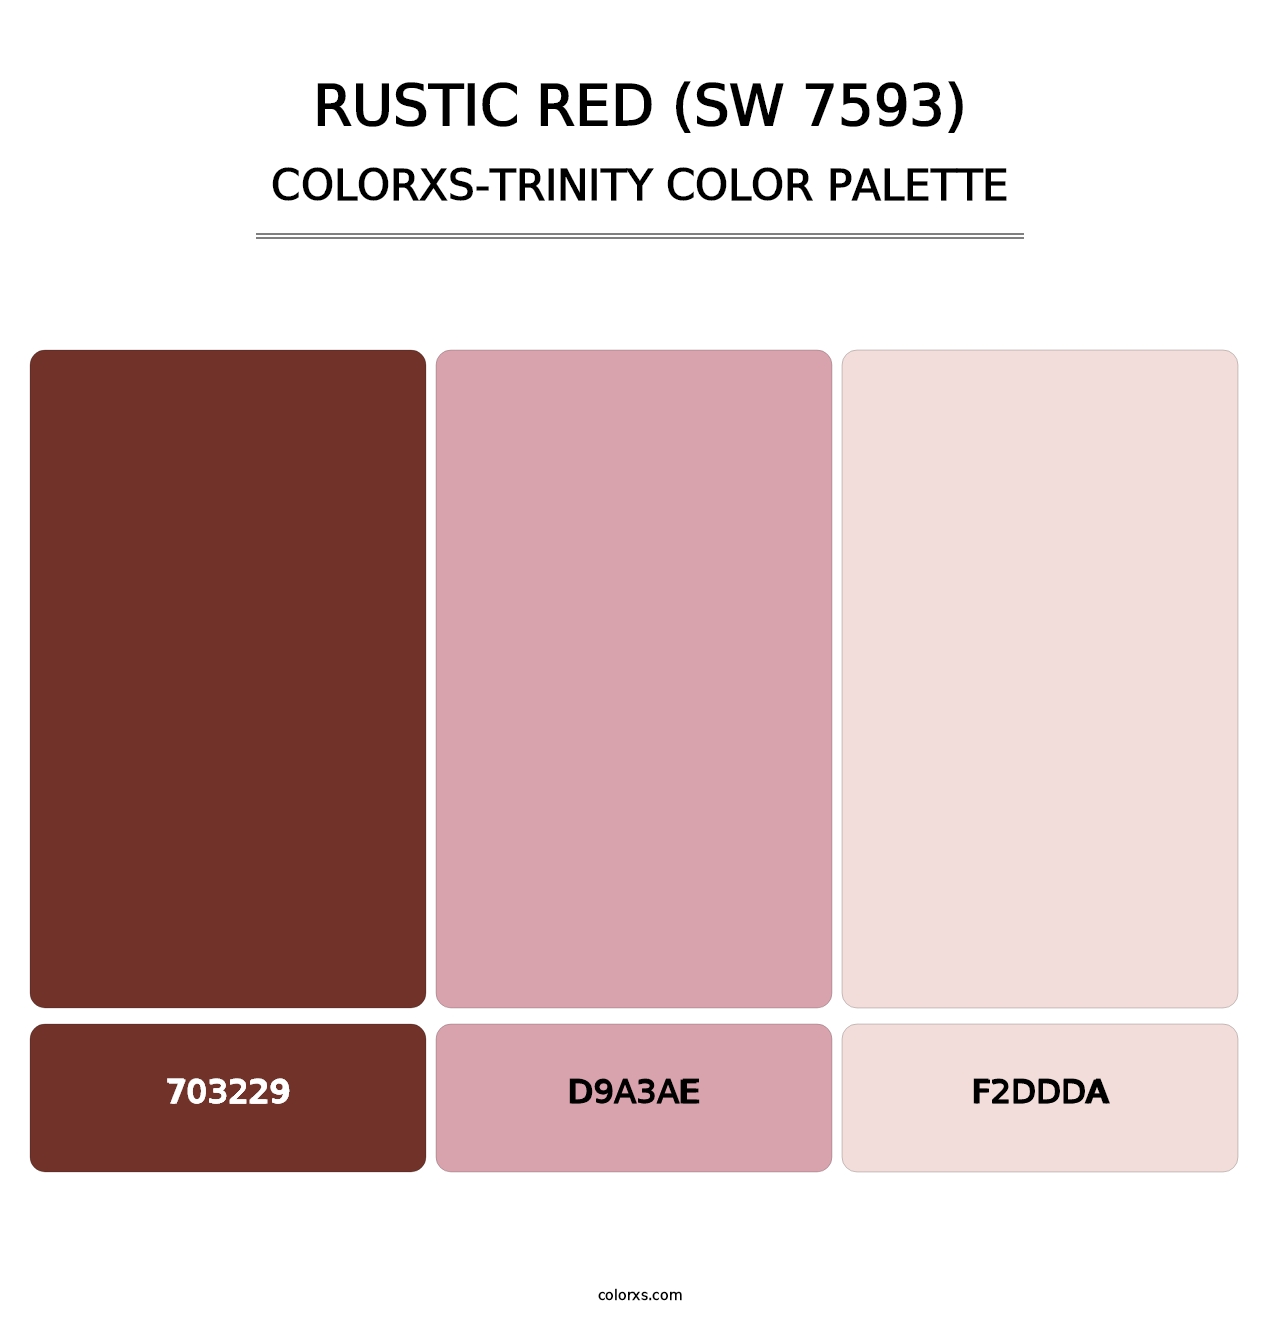 Rustic Red (SW 7593) - Colorxs Trinity Palette